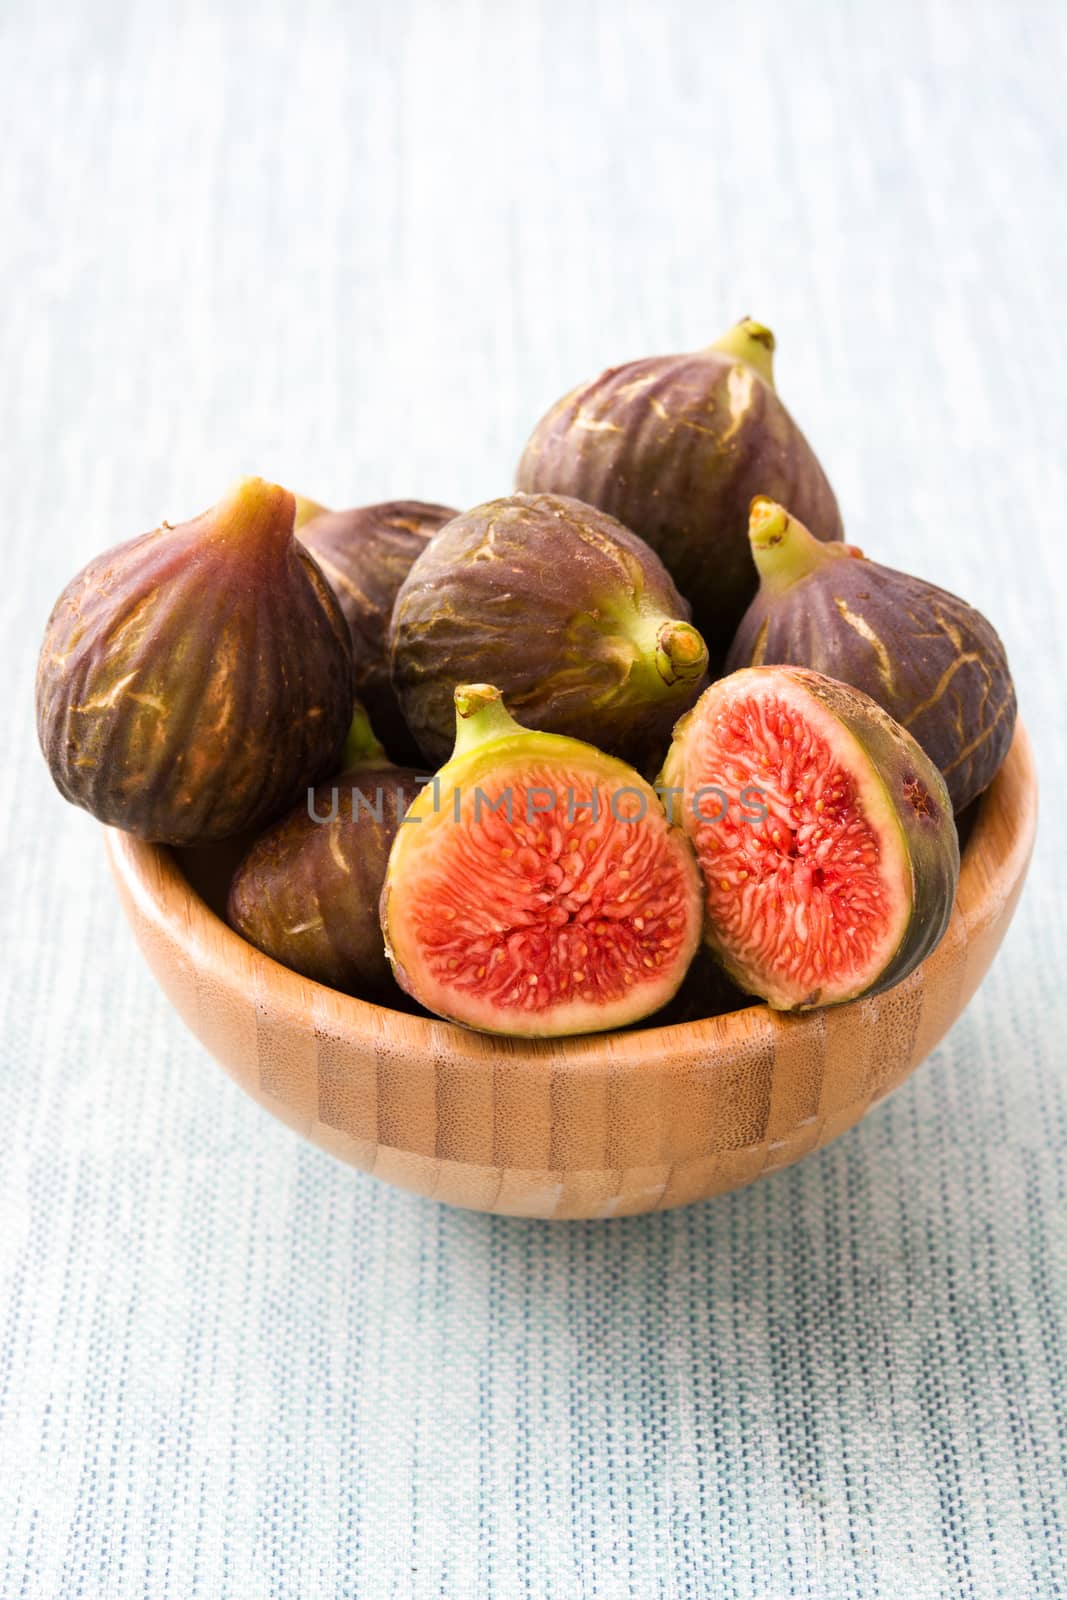 Fresh figs on wooden bowl and blue background by chandlervid85